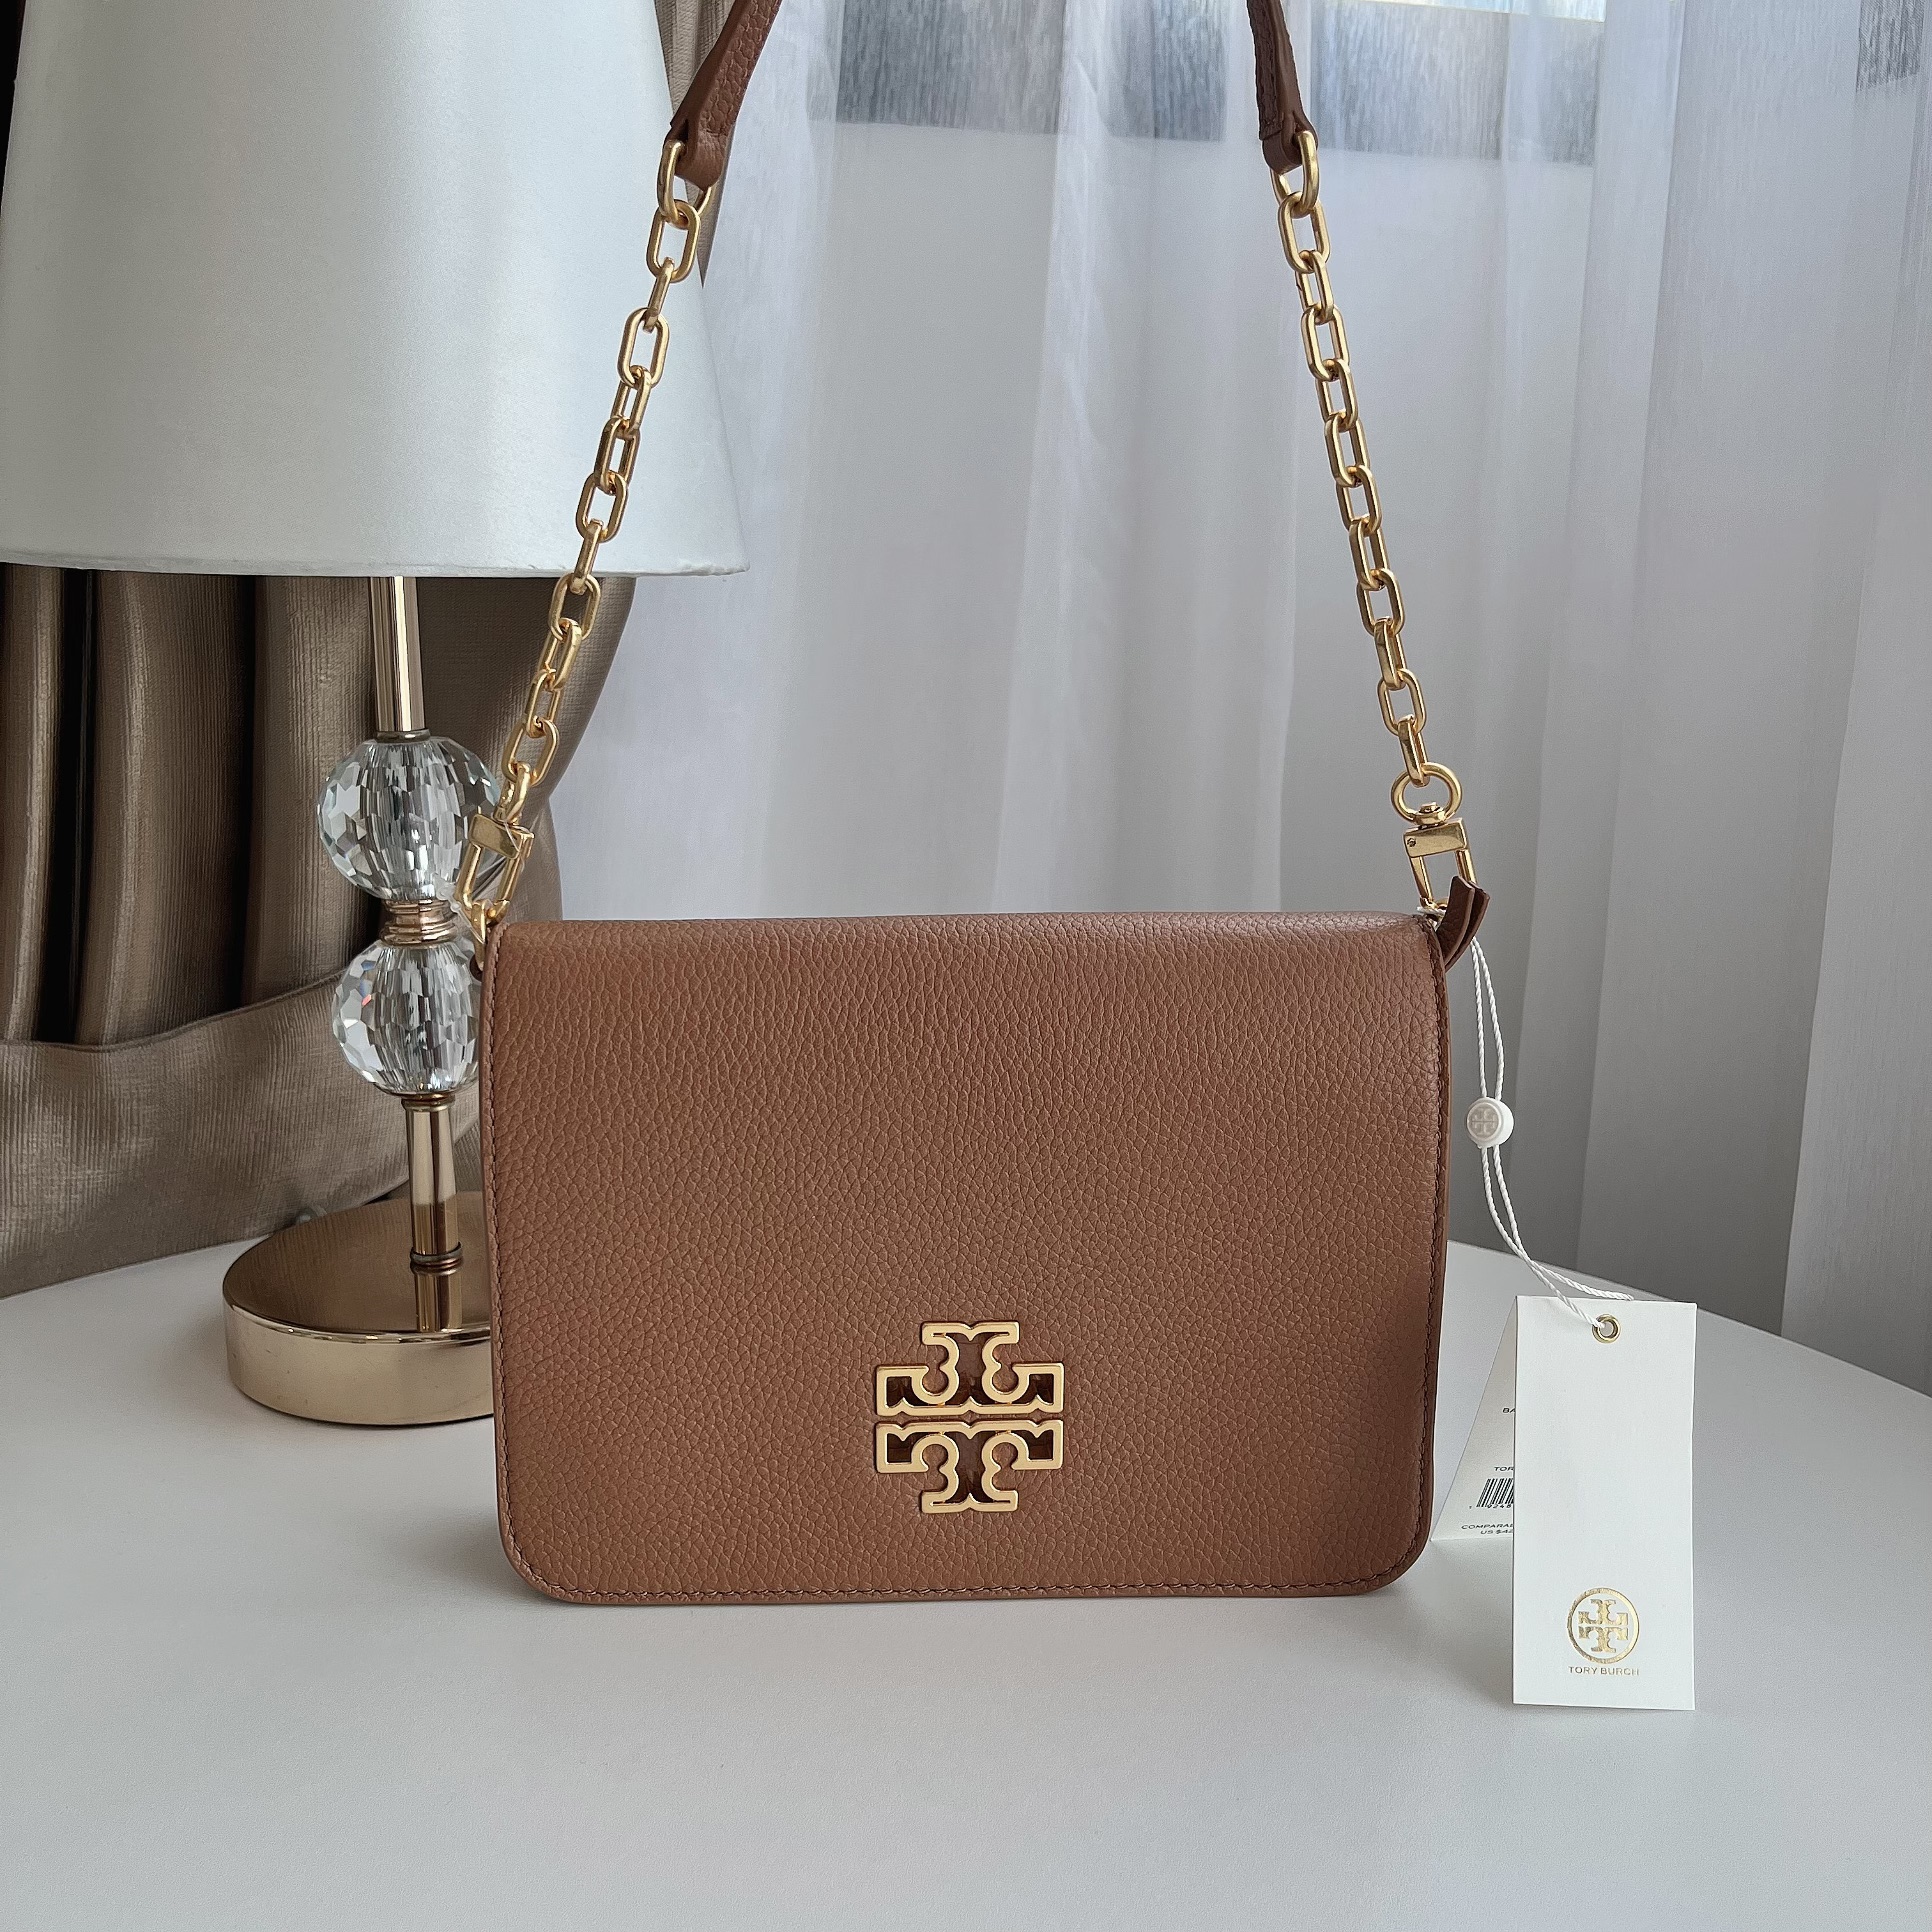 Totes bags Tory Burch - Gemini Link canvas small tote - 53304892